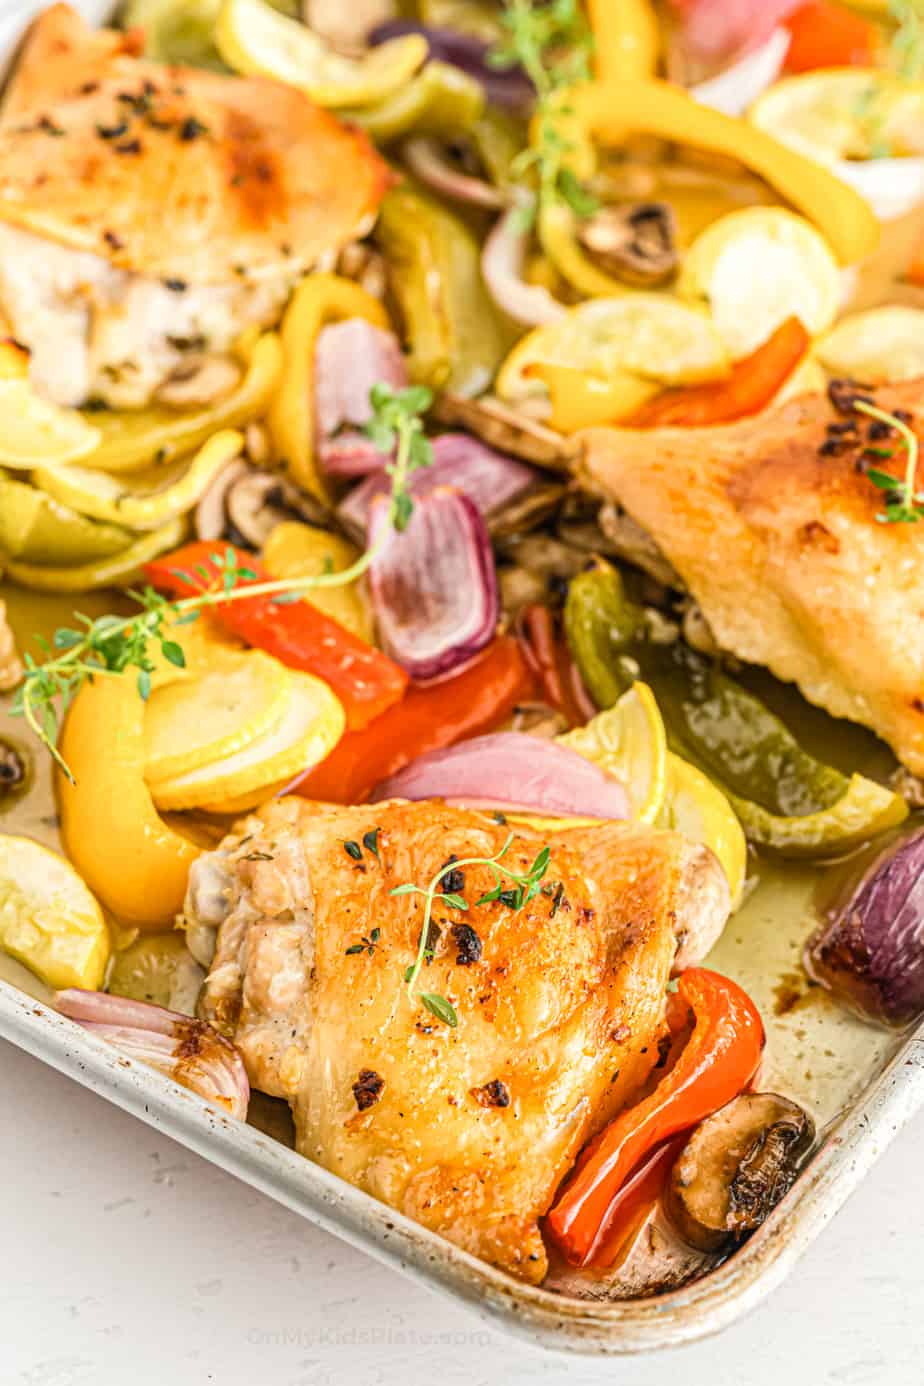 Oven baked chicken thighs with roasted vegetables close up on the corner of the pan.